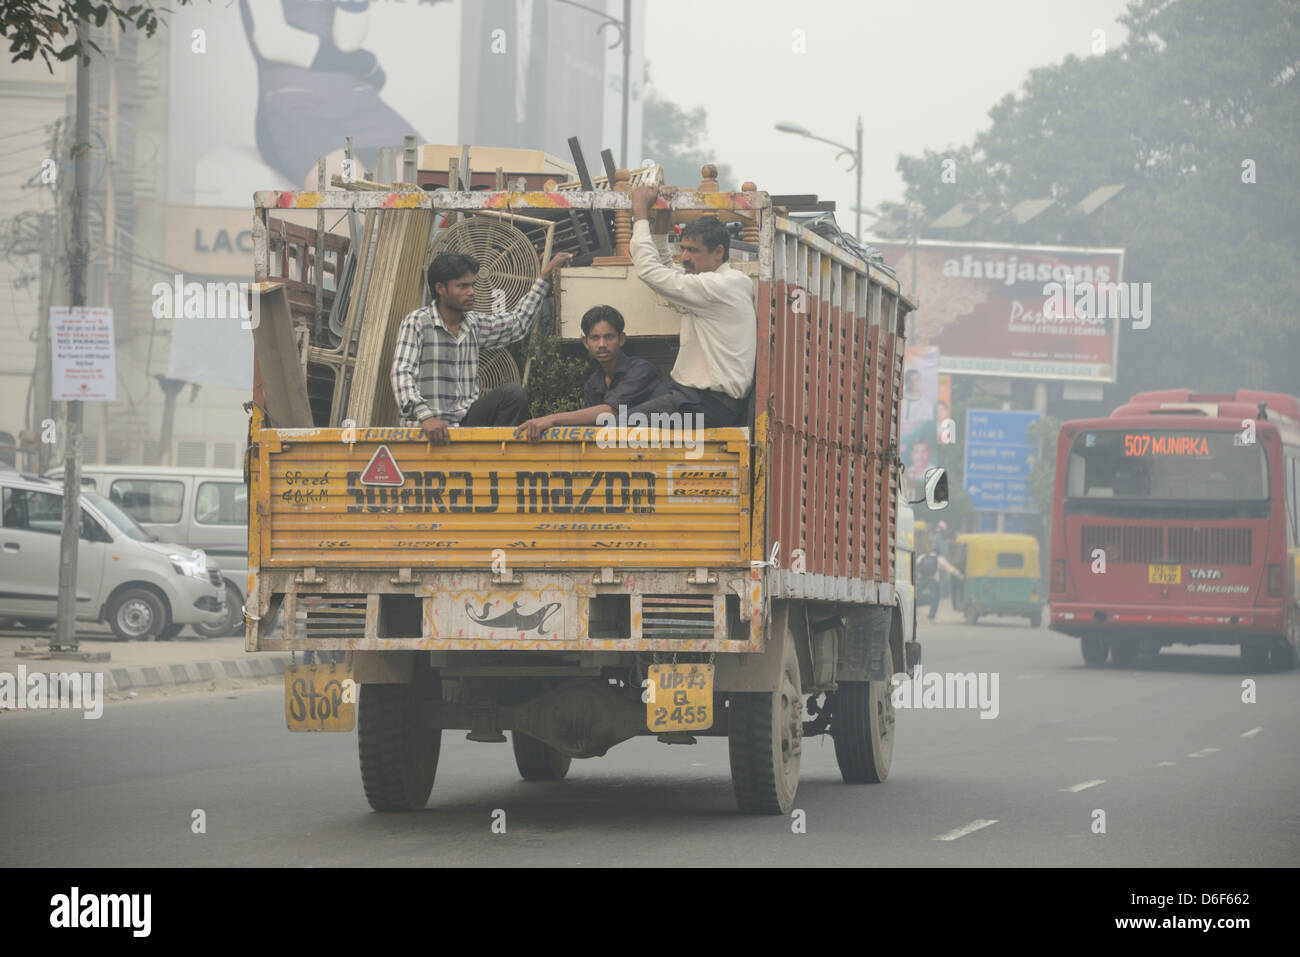 Indian workers in the back of a truck in Delhi, India Stock Photo